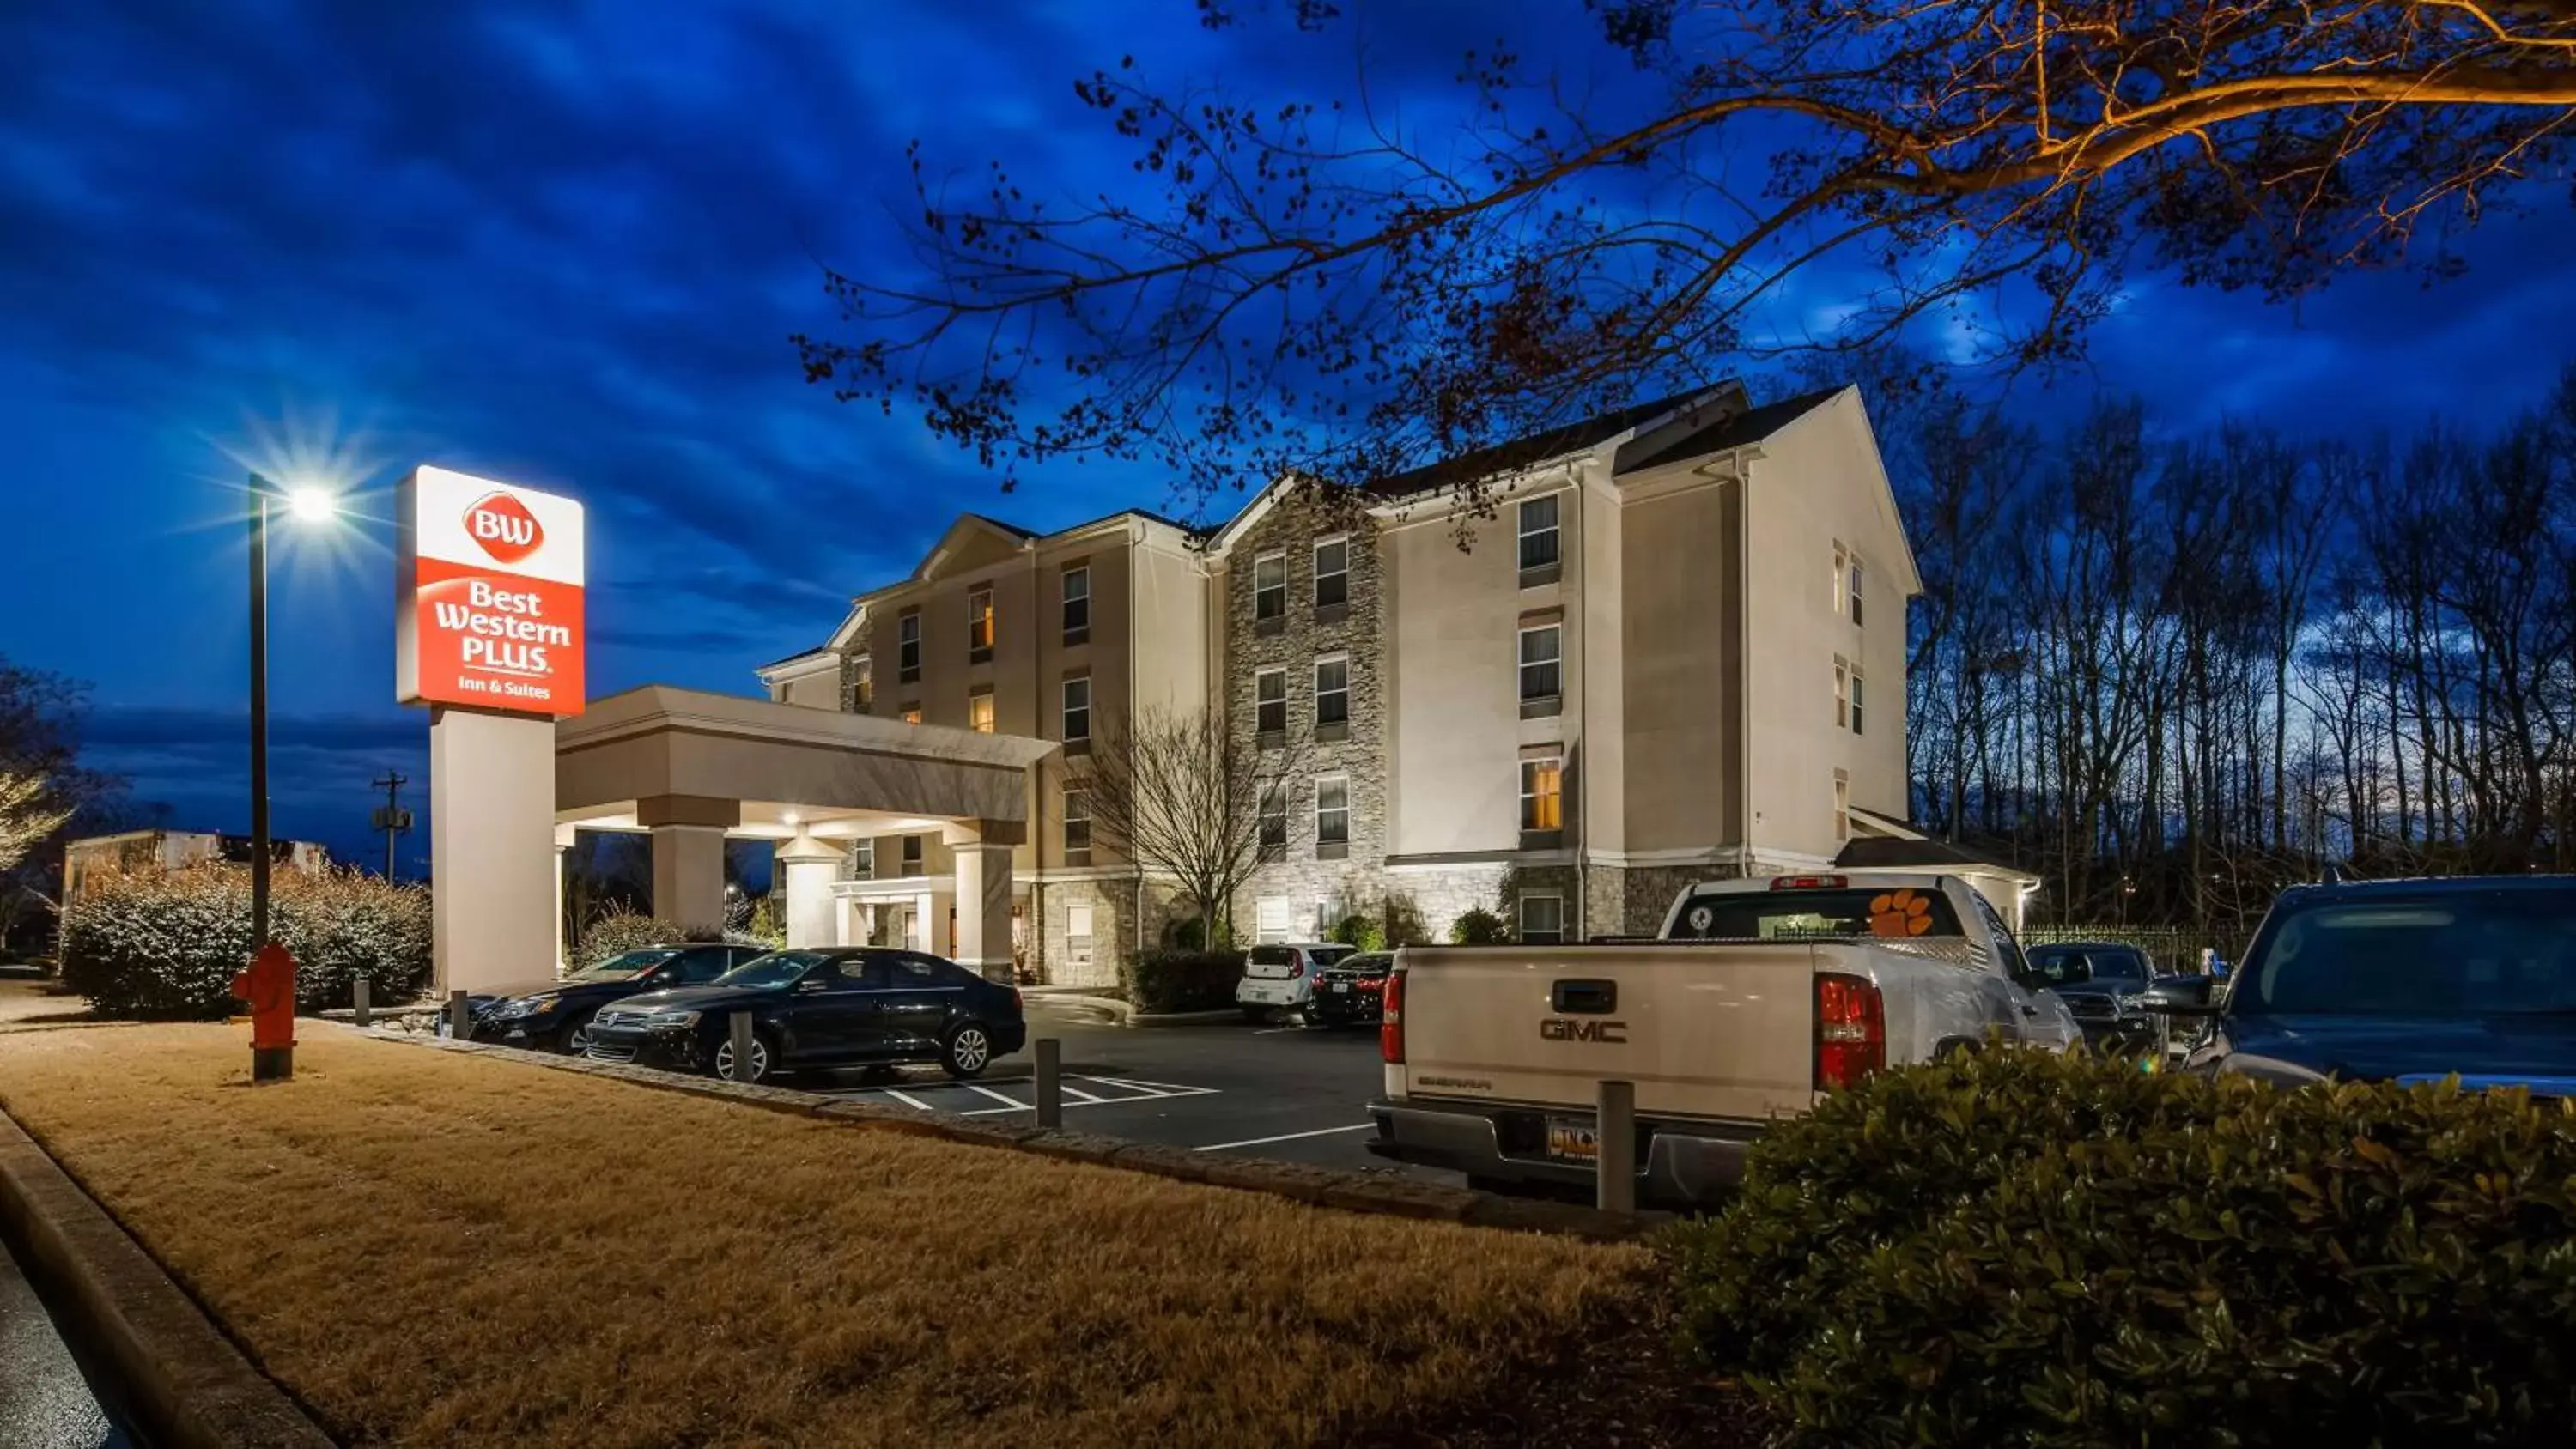 Property building in Best Western Plus Greenville South